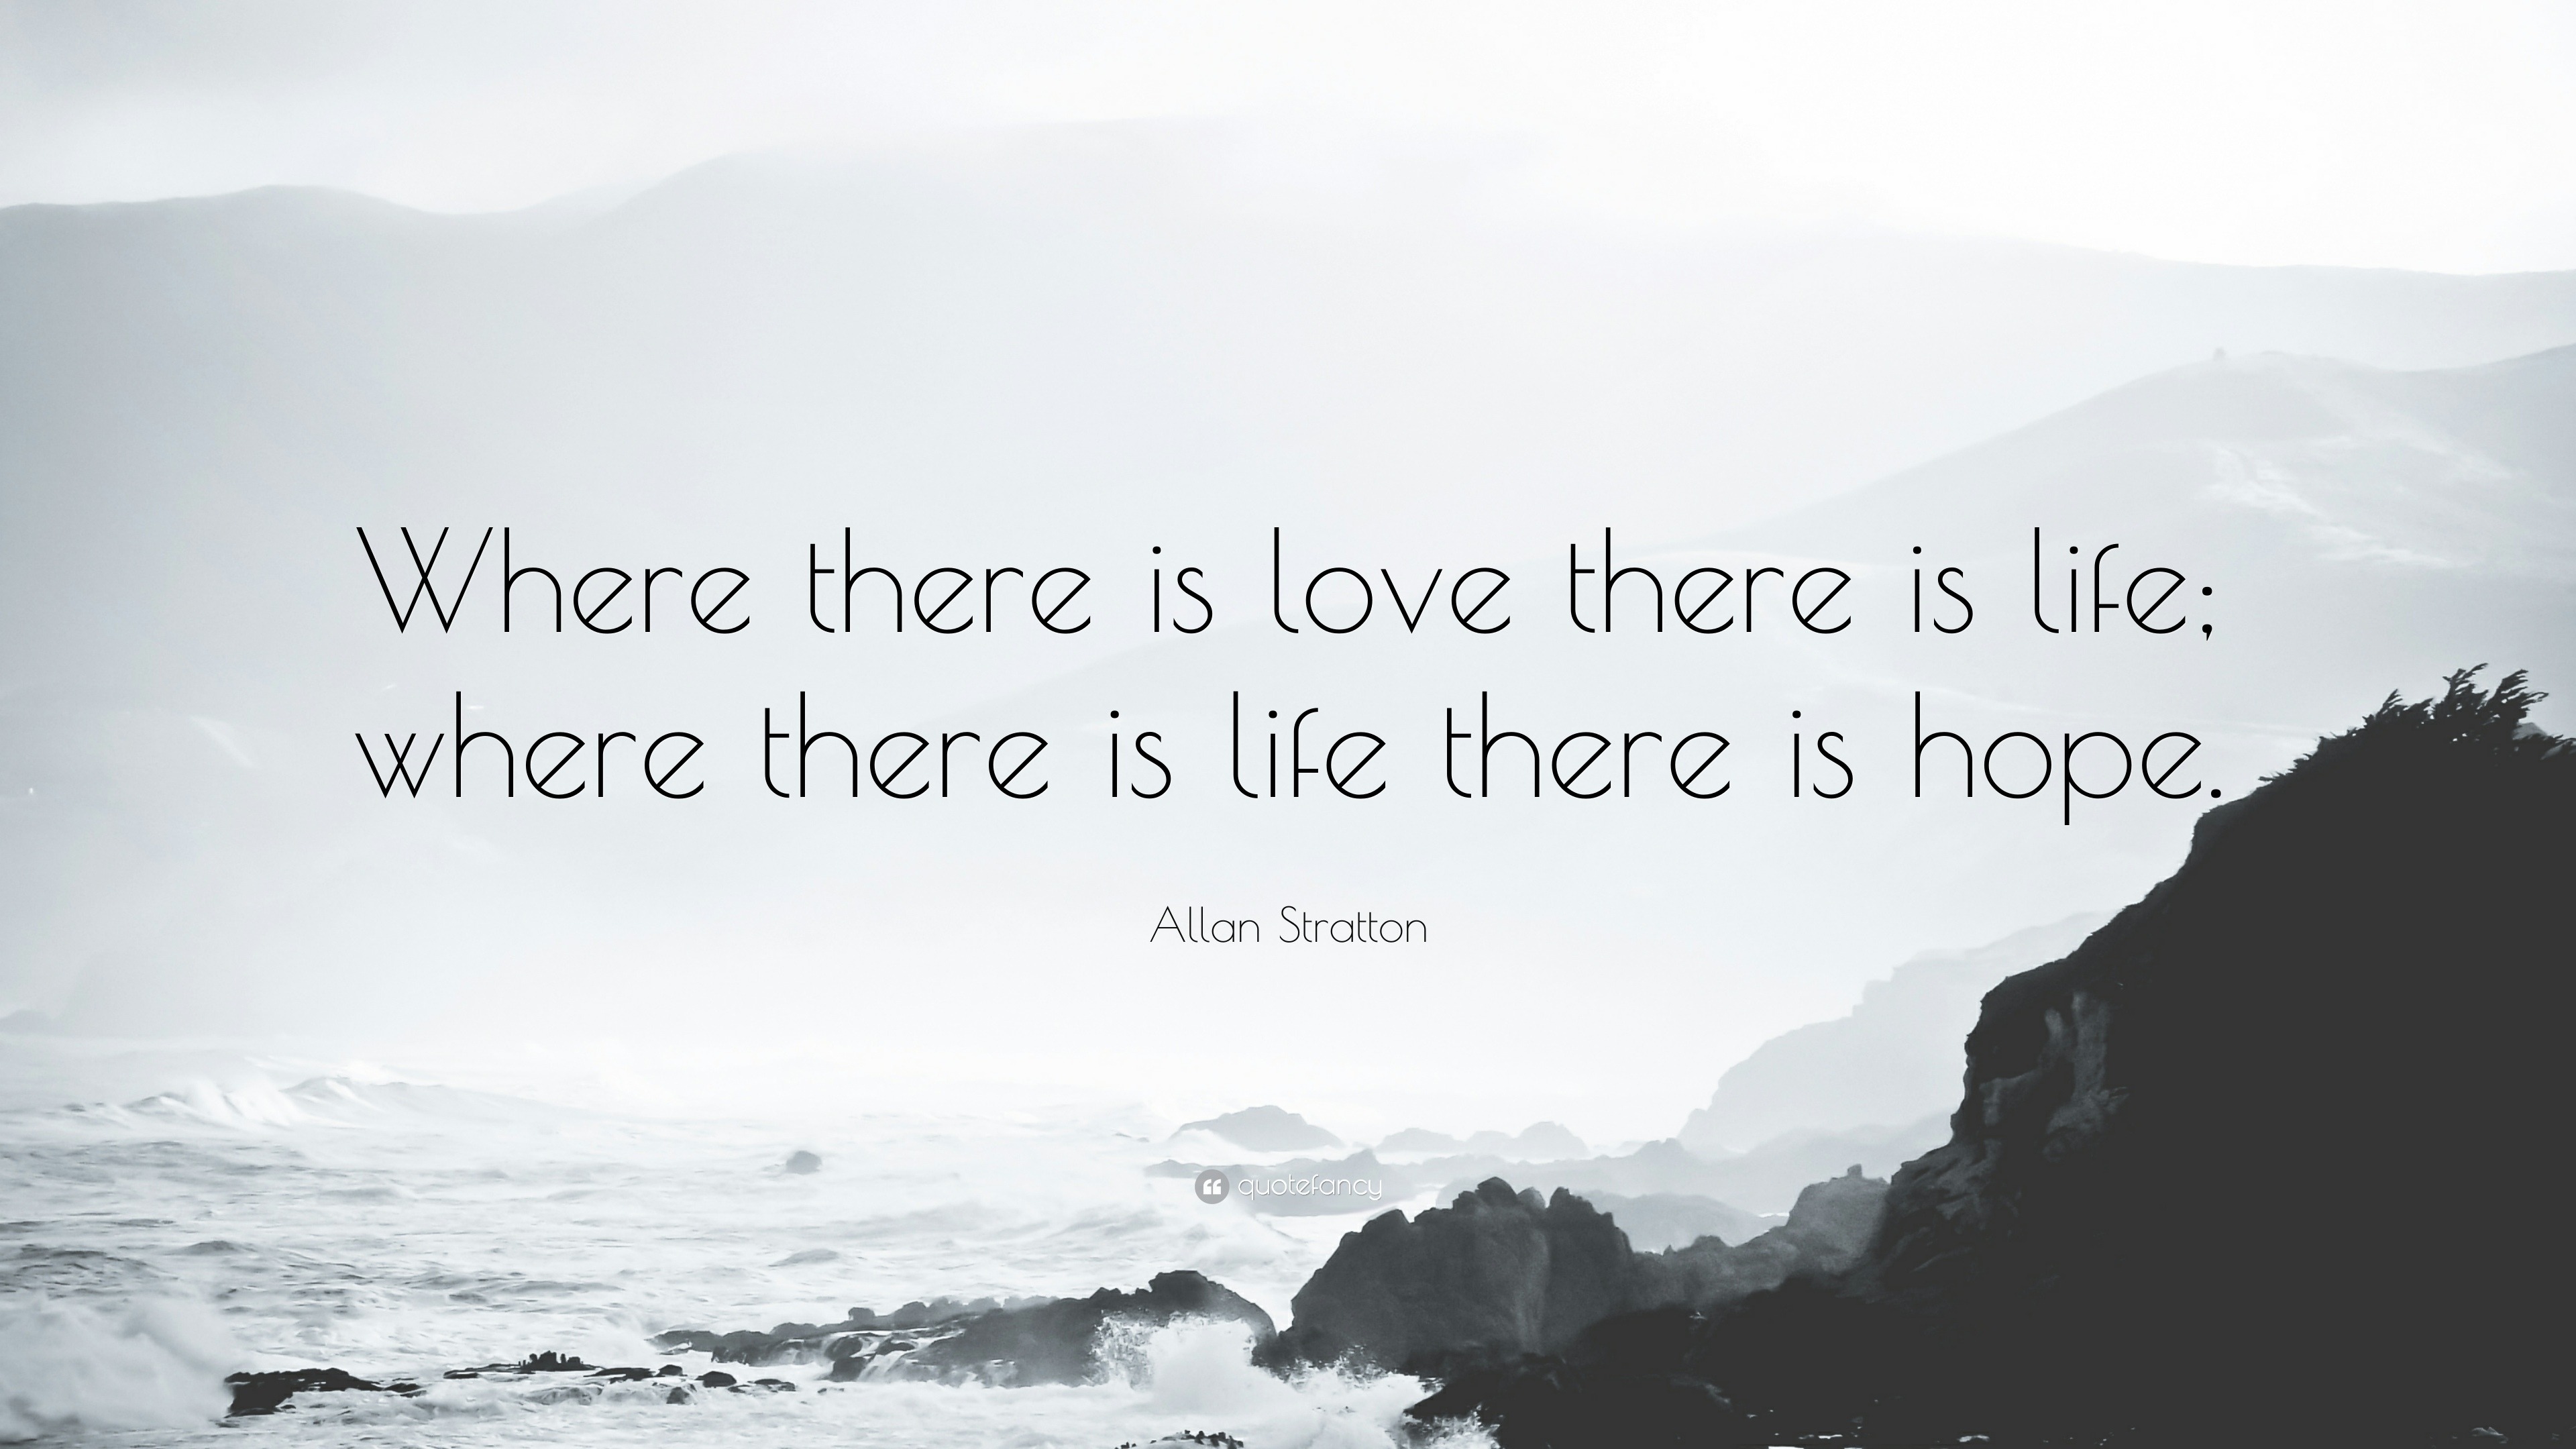 Allan Stratton Quote “Where there is love there is life where there is